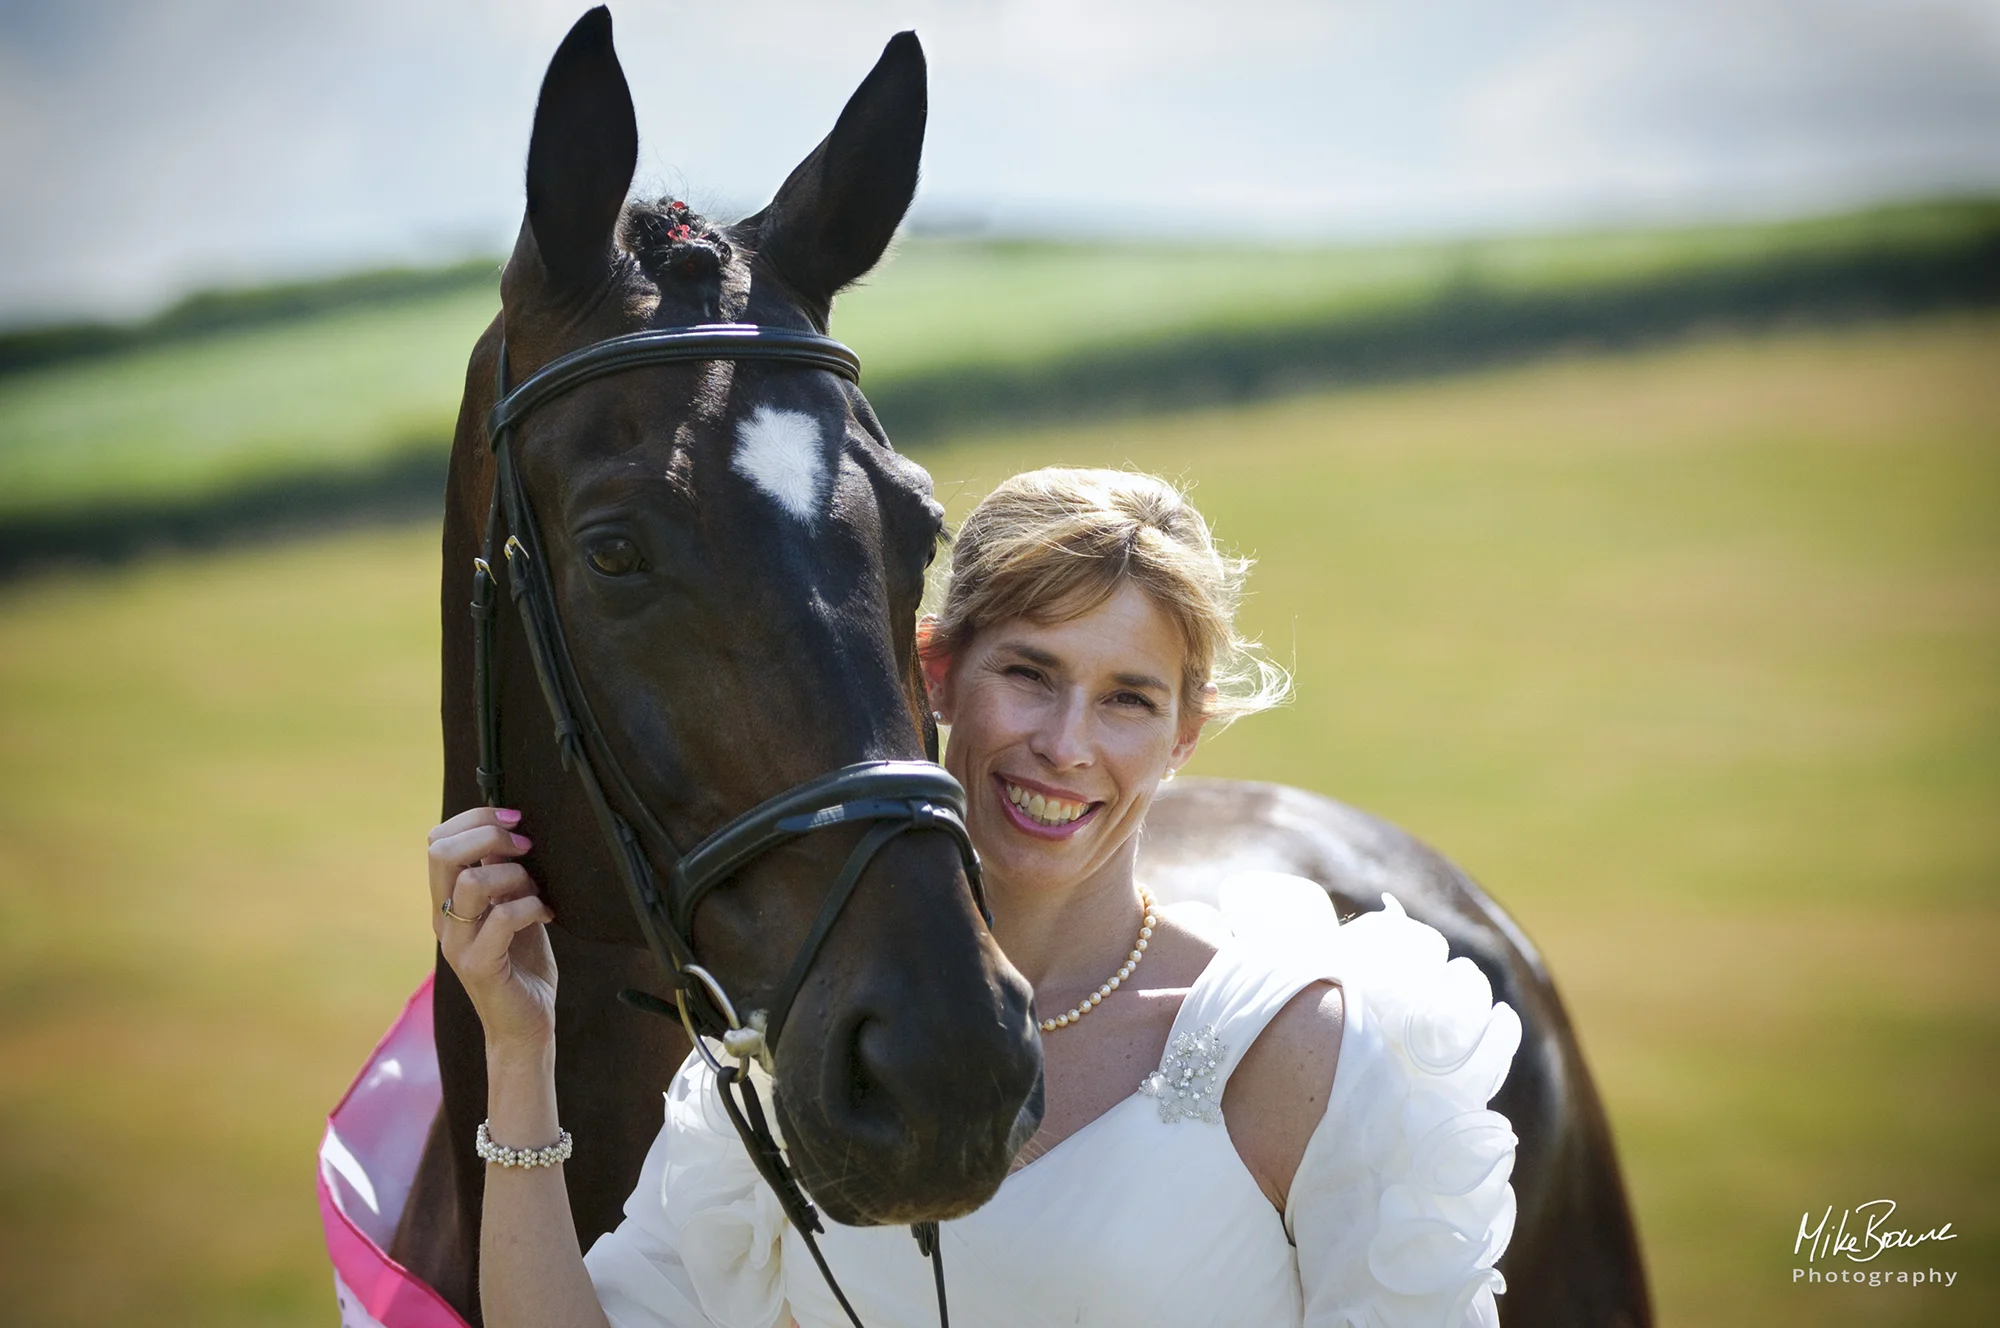 Smiling woman in a wedding dress holding the head of a thoroughbred horse in a field on a sunny day